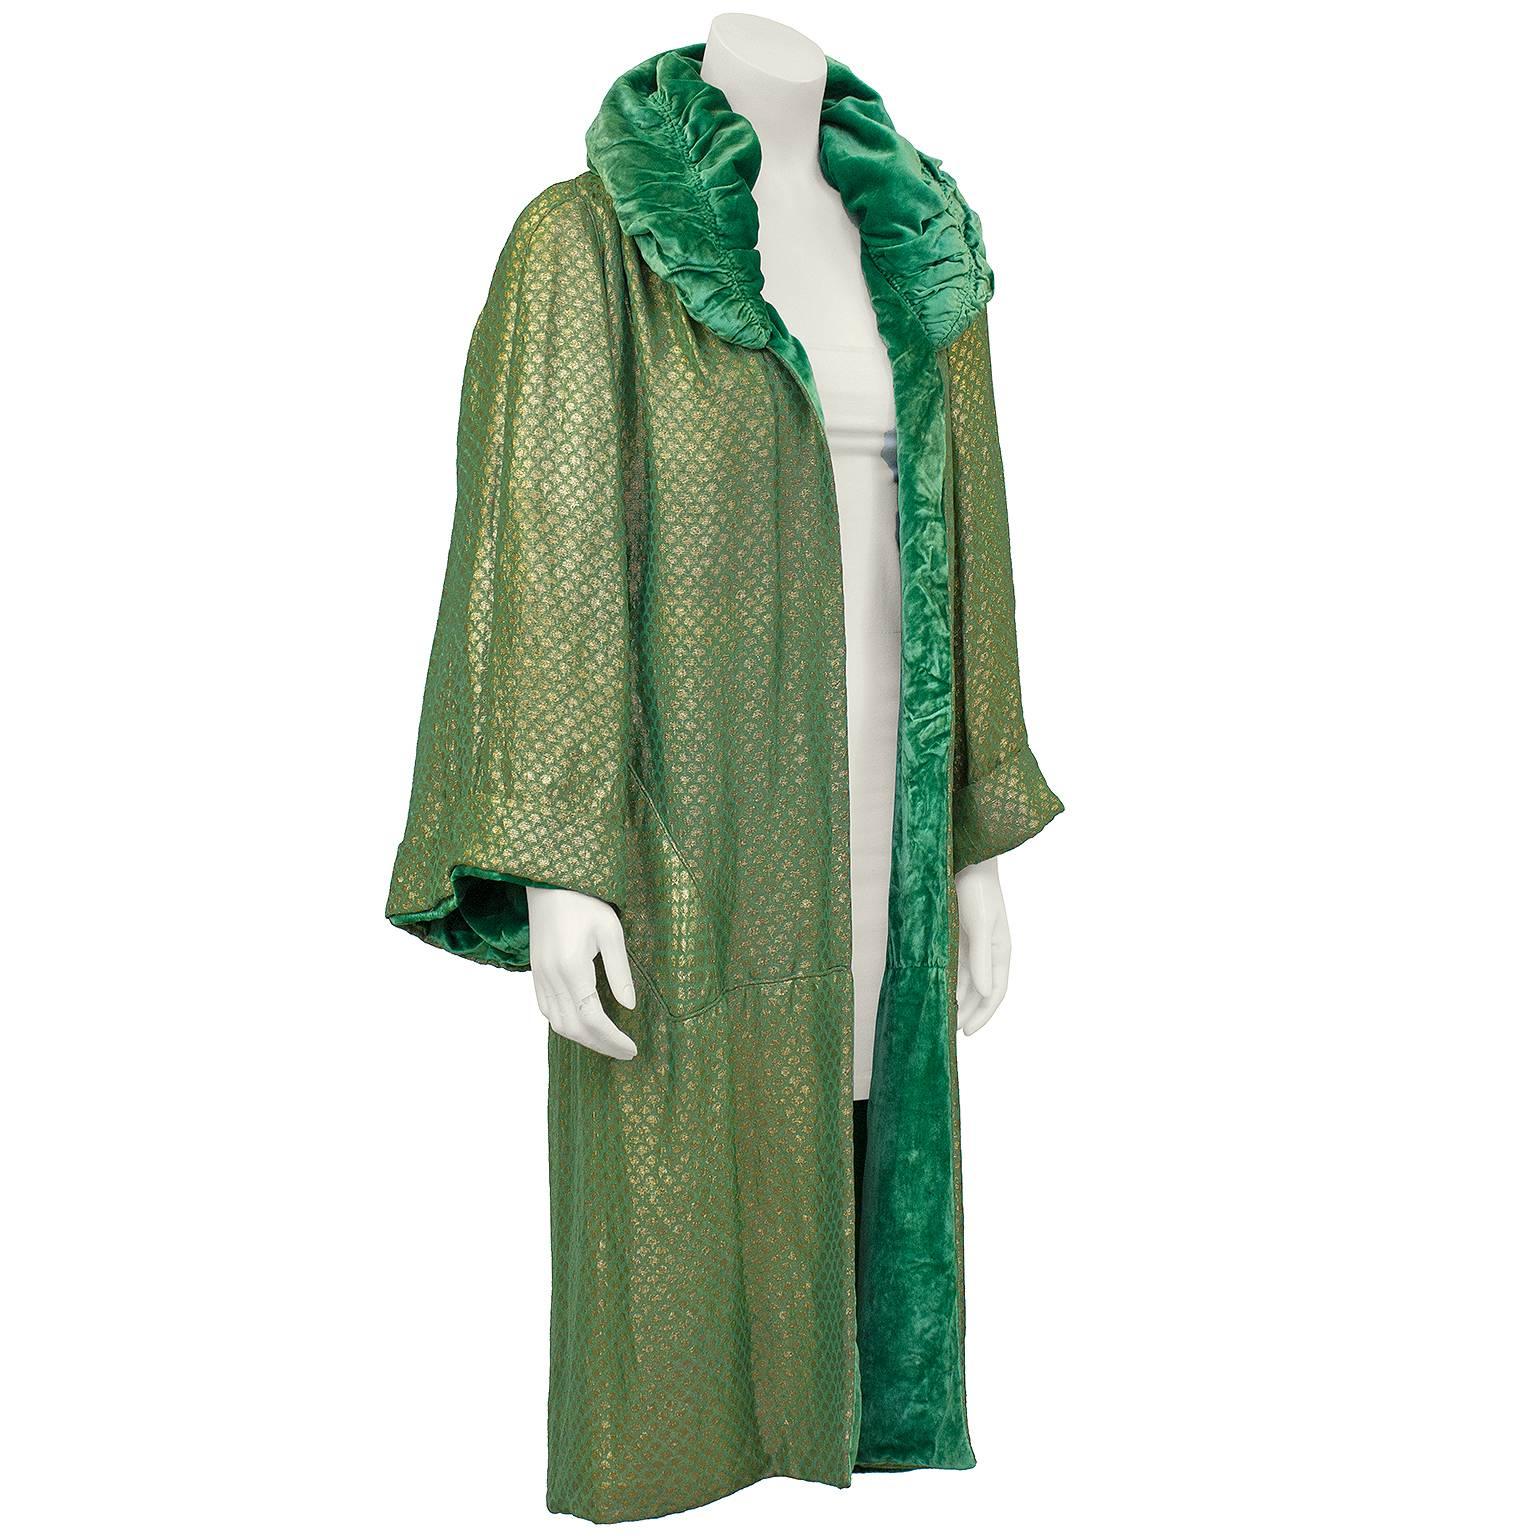 Stunning opera coat dating from the Roaring 20s. Gorgeous gold and green silk jacquard lined in emerald green velvet. Large ruched green velvet collar. Beautiful draping. Excellent vintage condition. Generous fit from US 2-8. No damage or visible